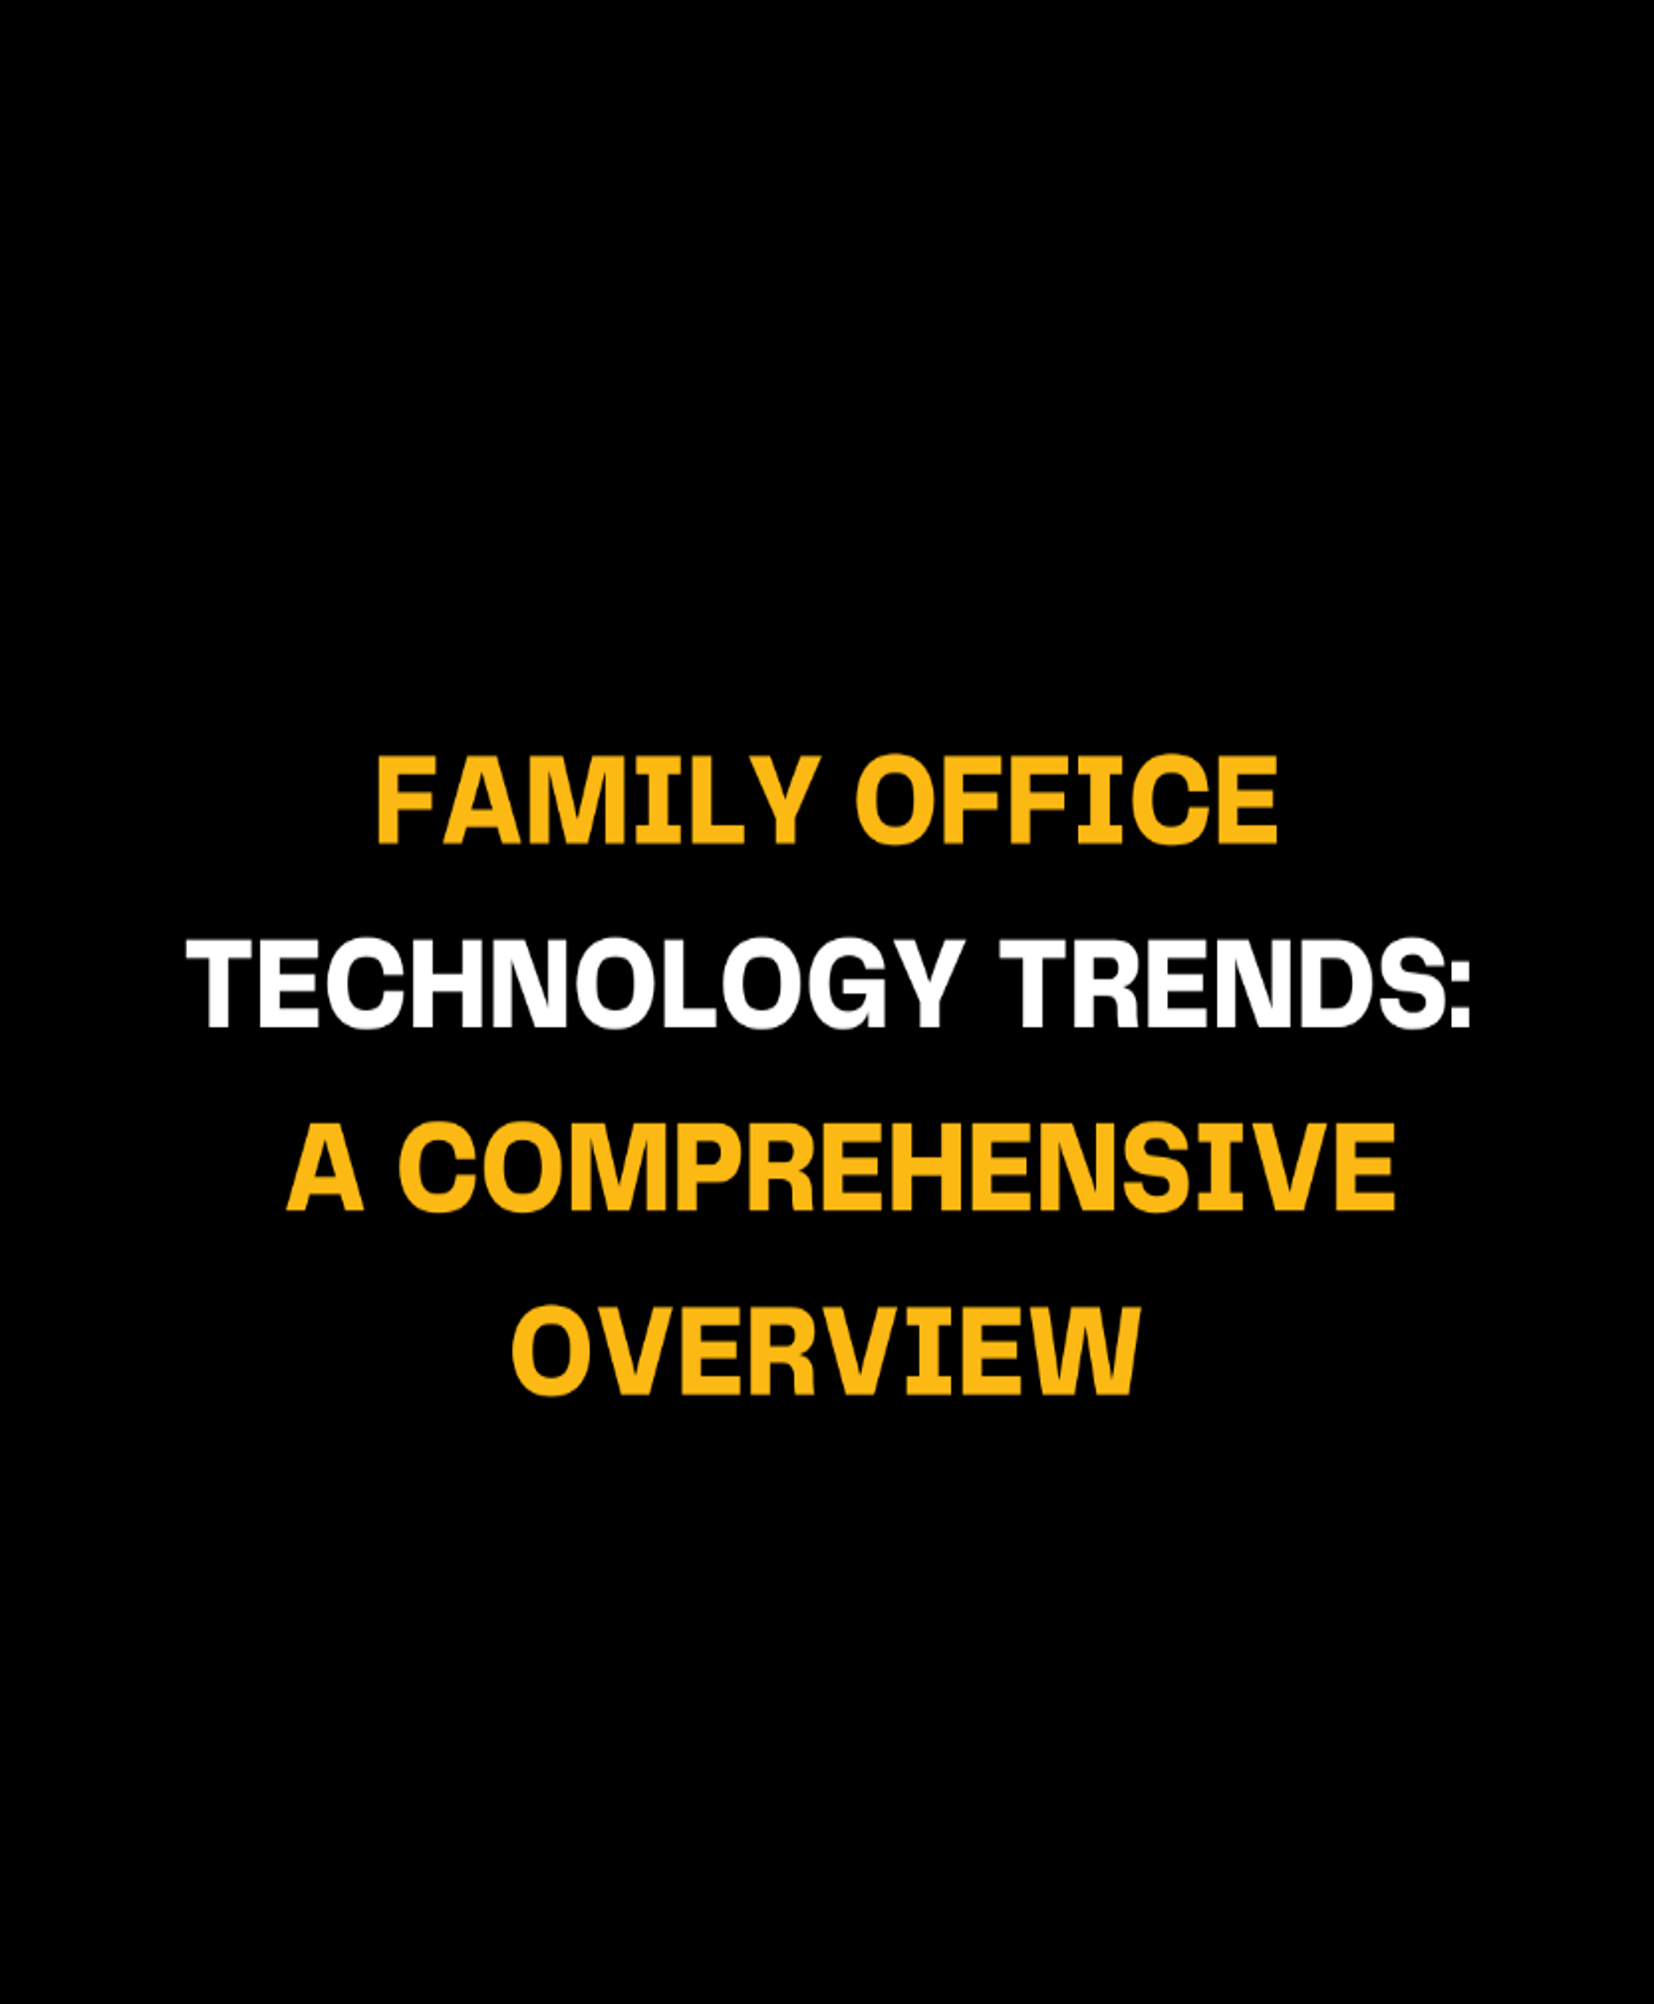 Family Office Technology Trends: A Comprehensive Overview